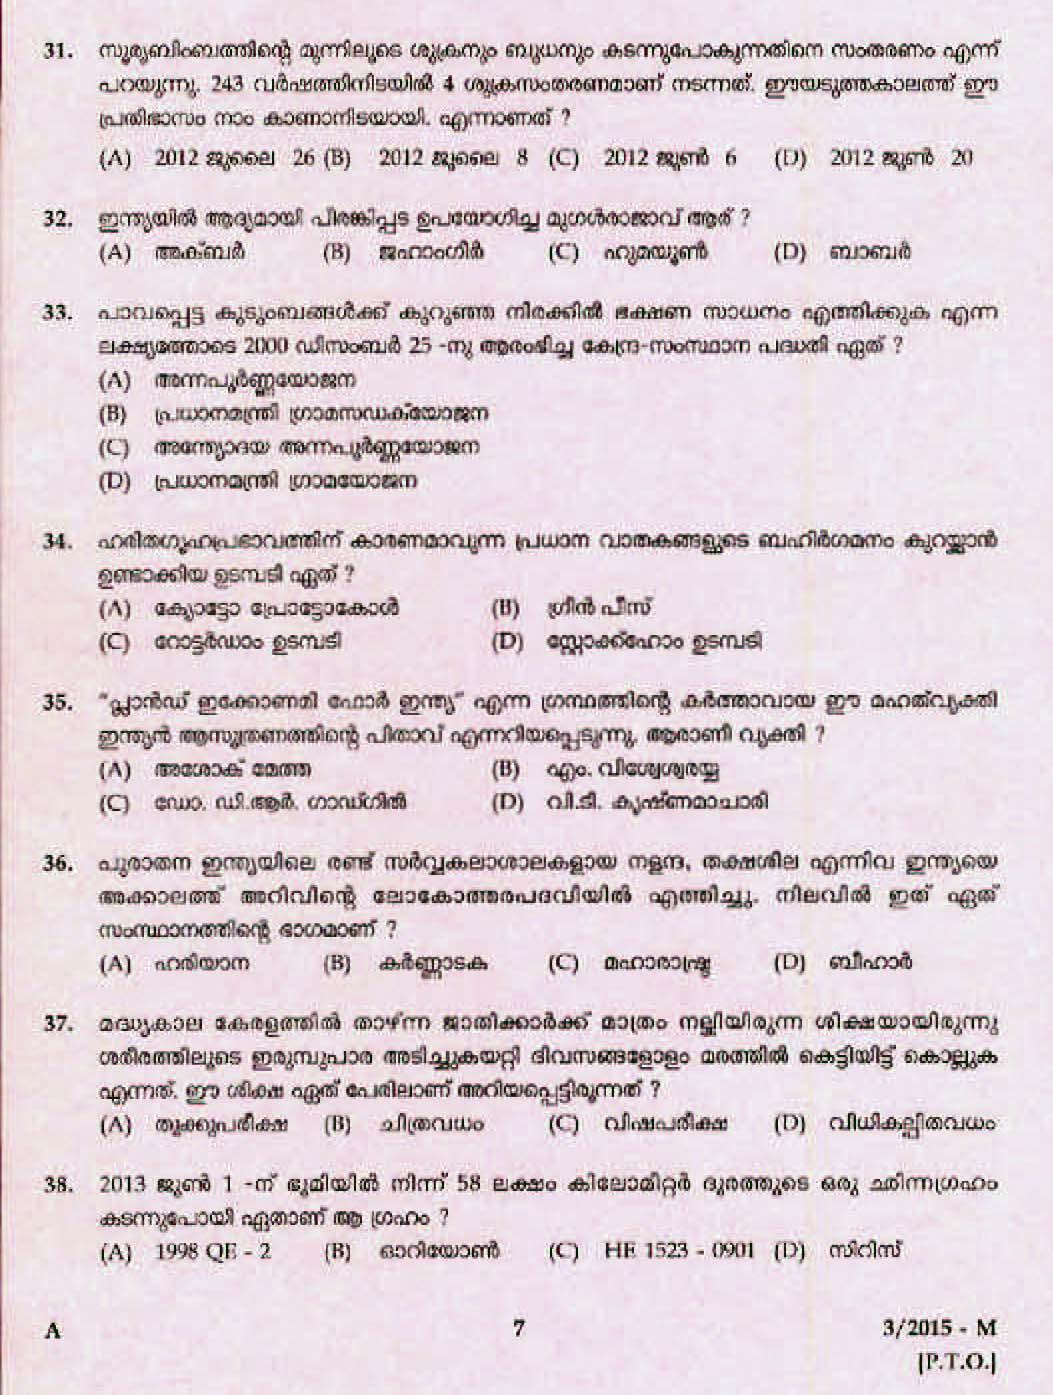 LD Clerk Thrissur District Question Paper Malayalam 2015 Paper Code 32015 M 5